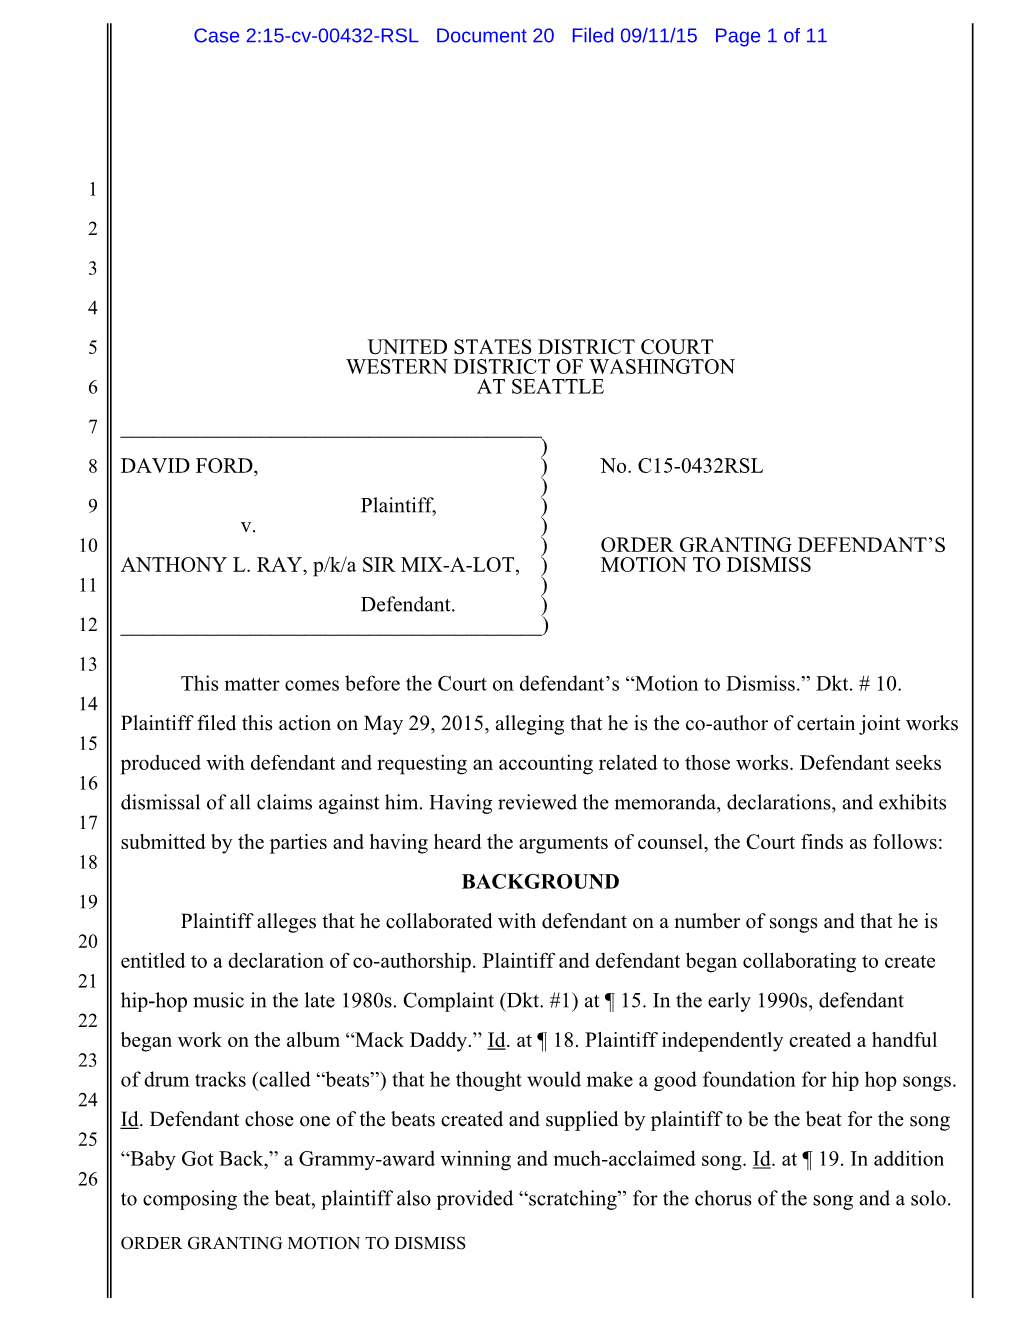 Case 2:15-Cv-00432-RSL Document 20 Filed 09/11/15 Page 1 of 11